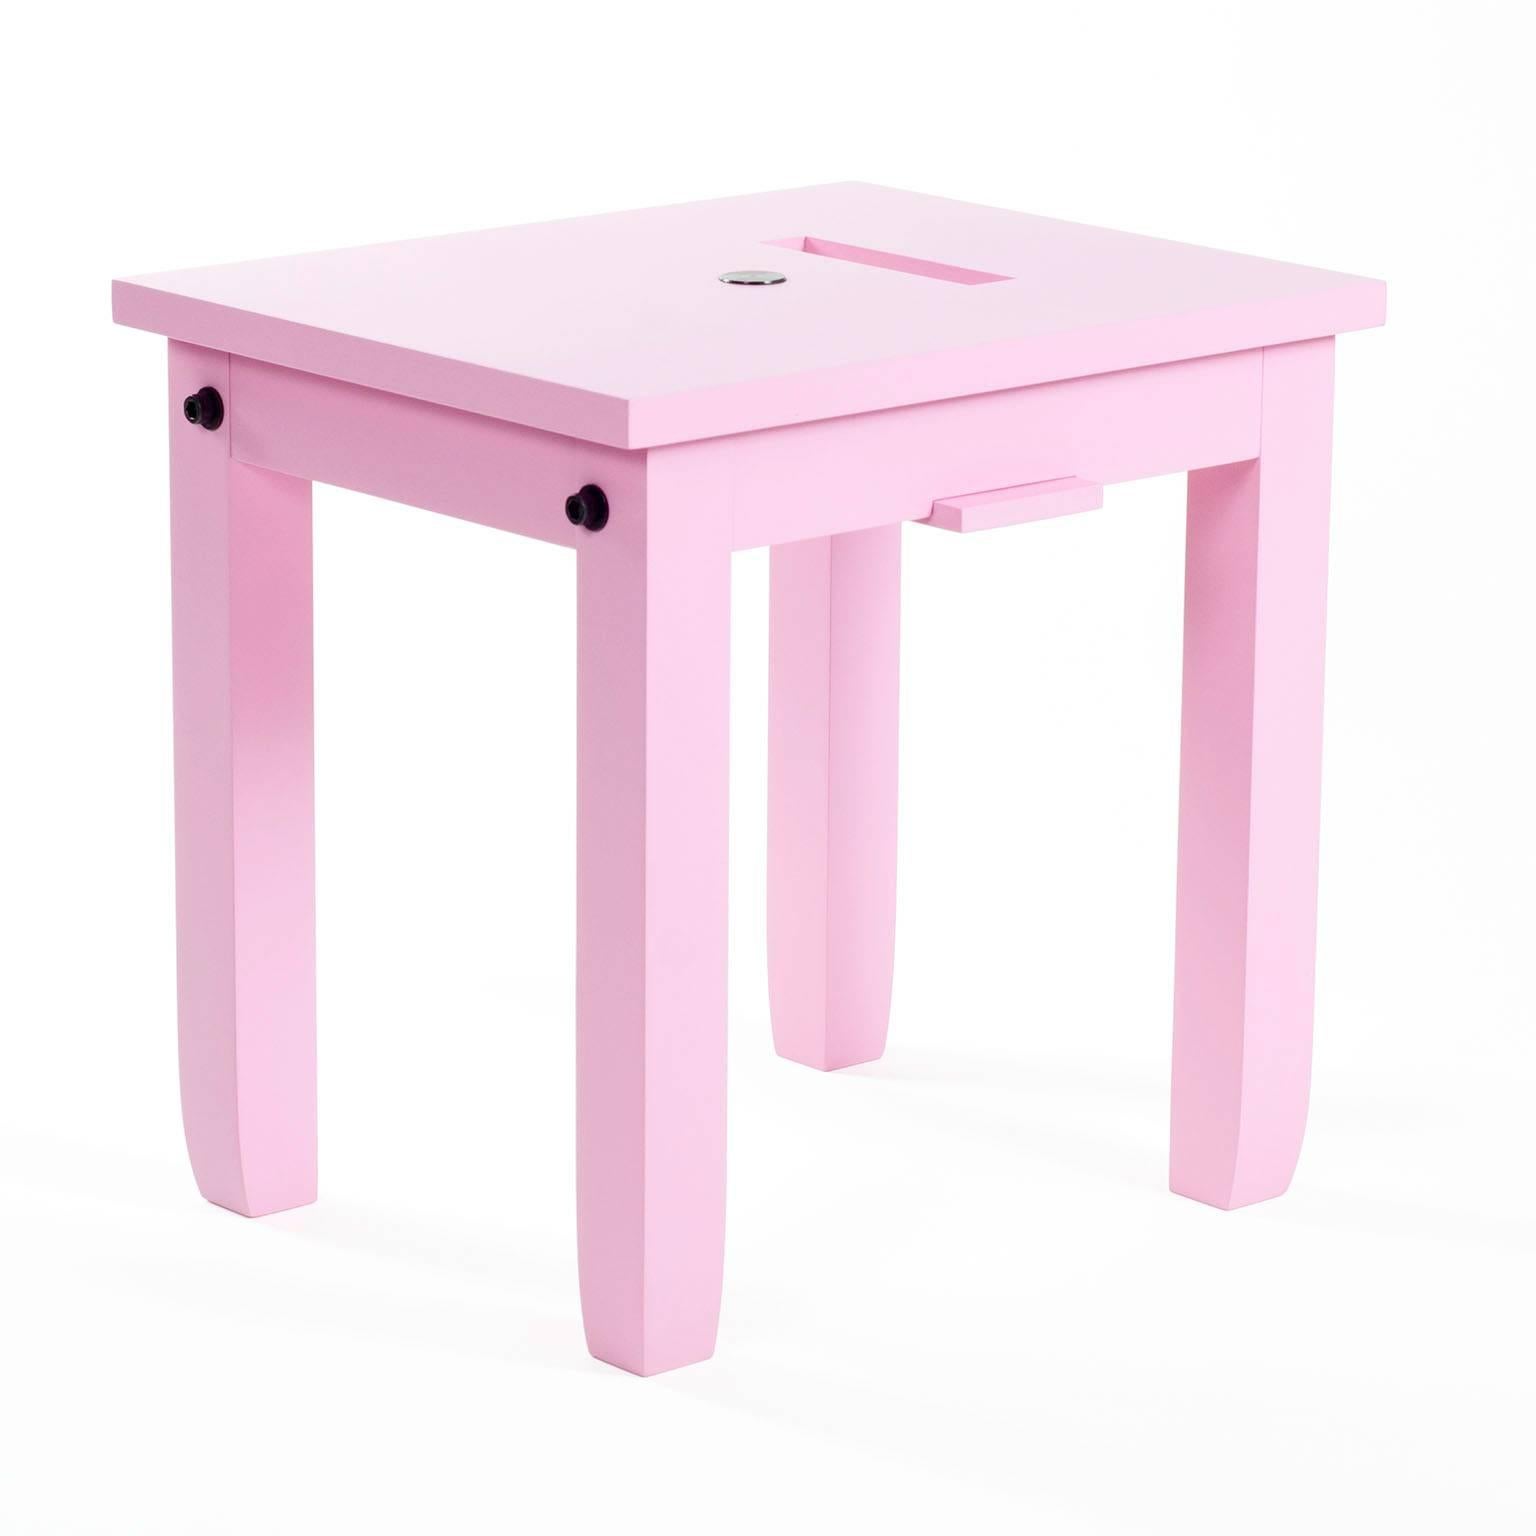 Painted Contemporary Pussyhat Pink Benchlet Stool or Bench Made in Brooklyn in Stock For Sale